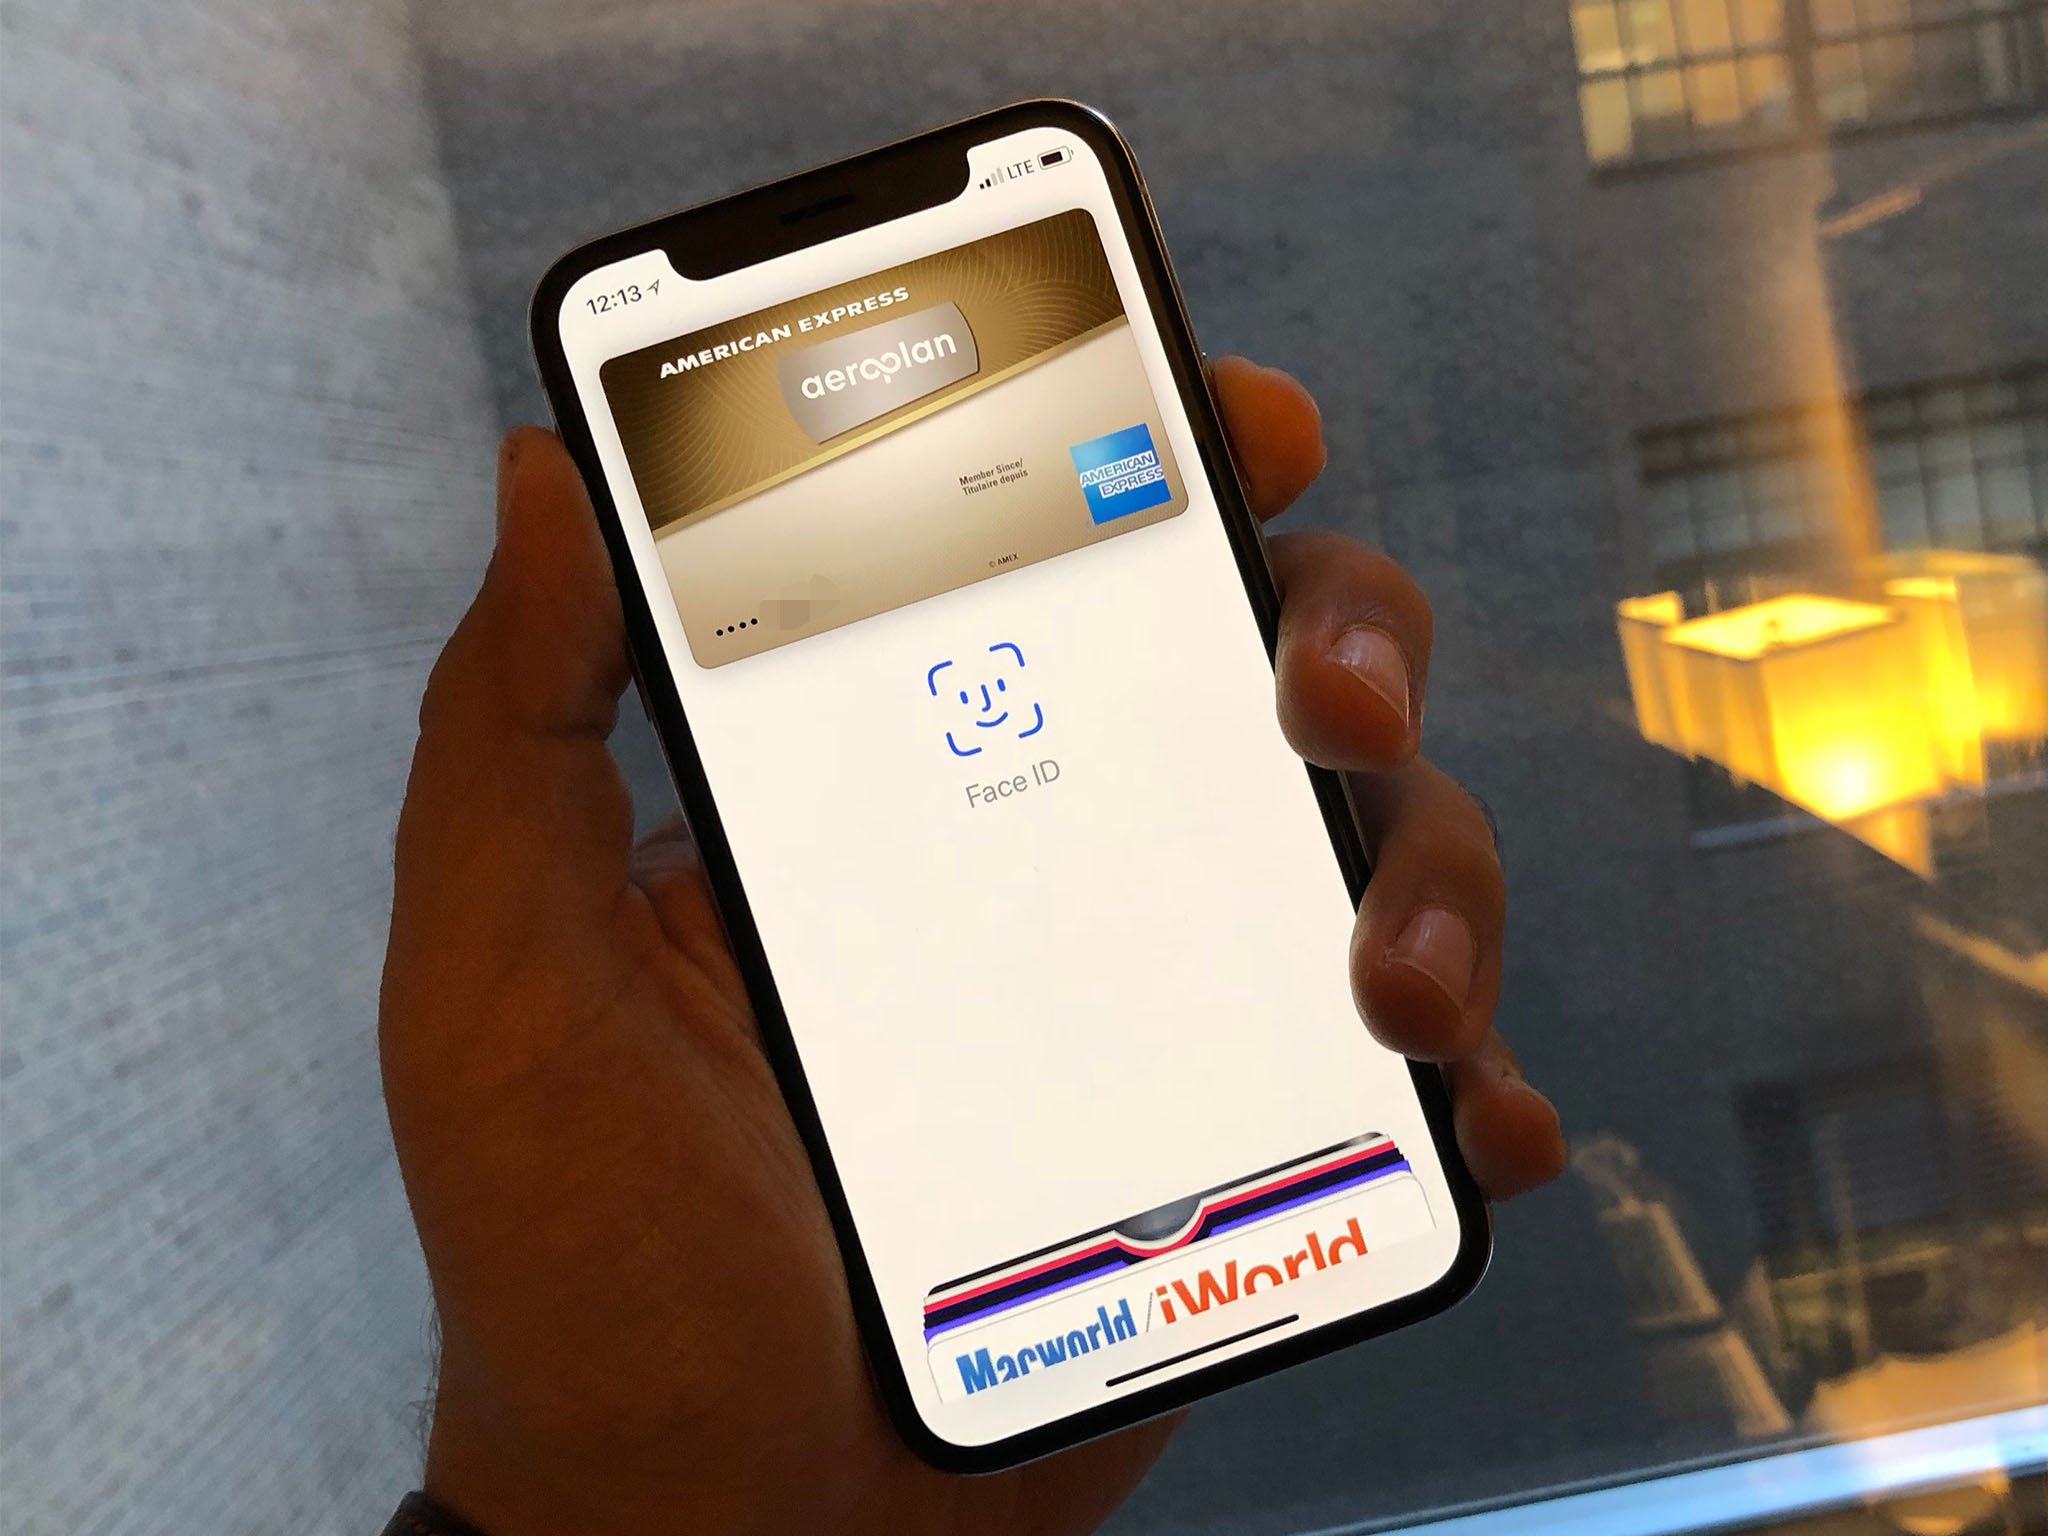 Apple Pay in use